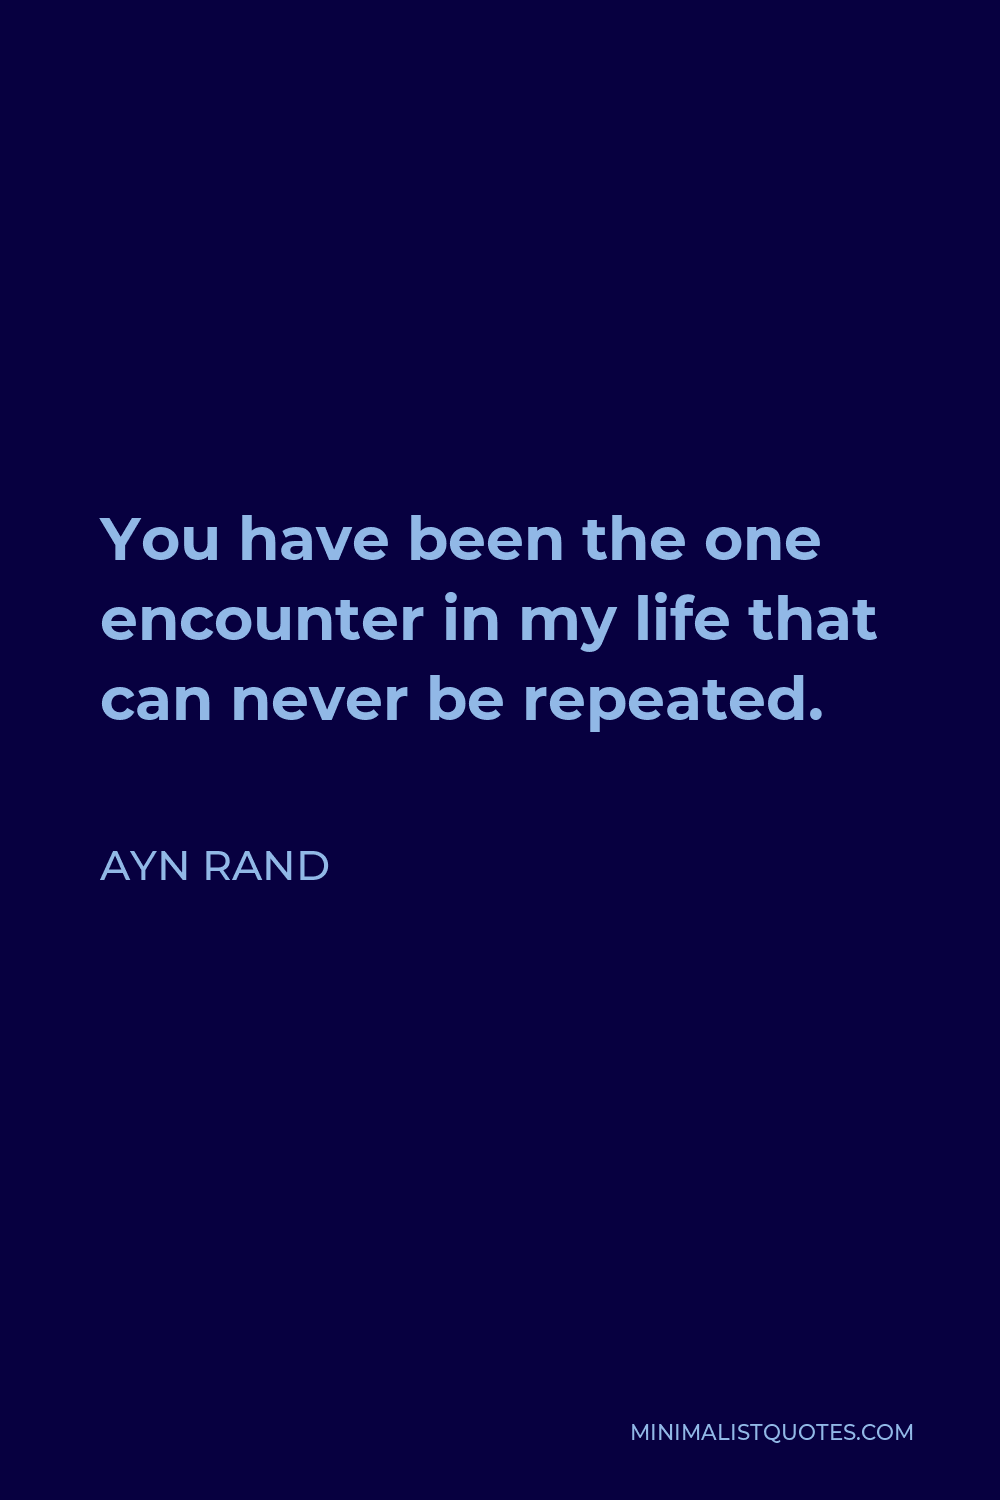 Ayn Rand Quote - You have been the one encounter in my life that can never be repeated.